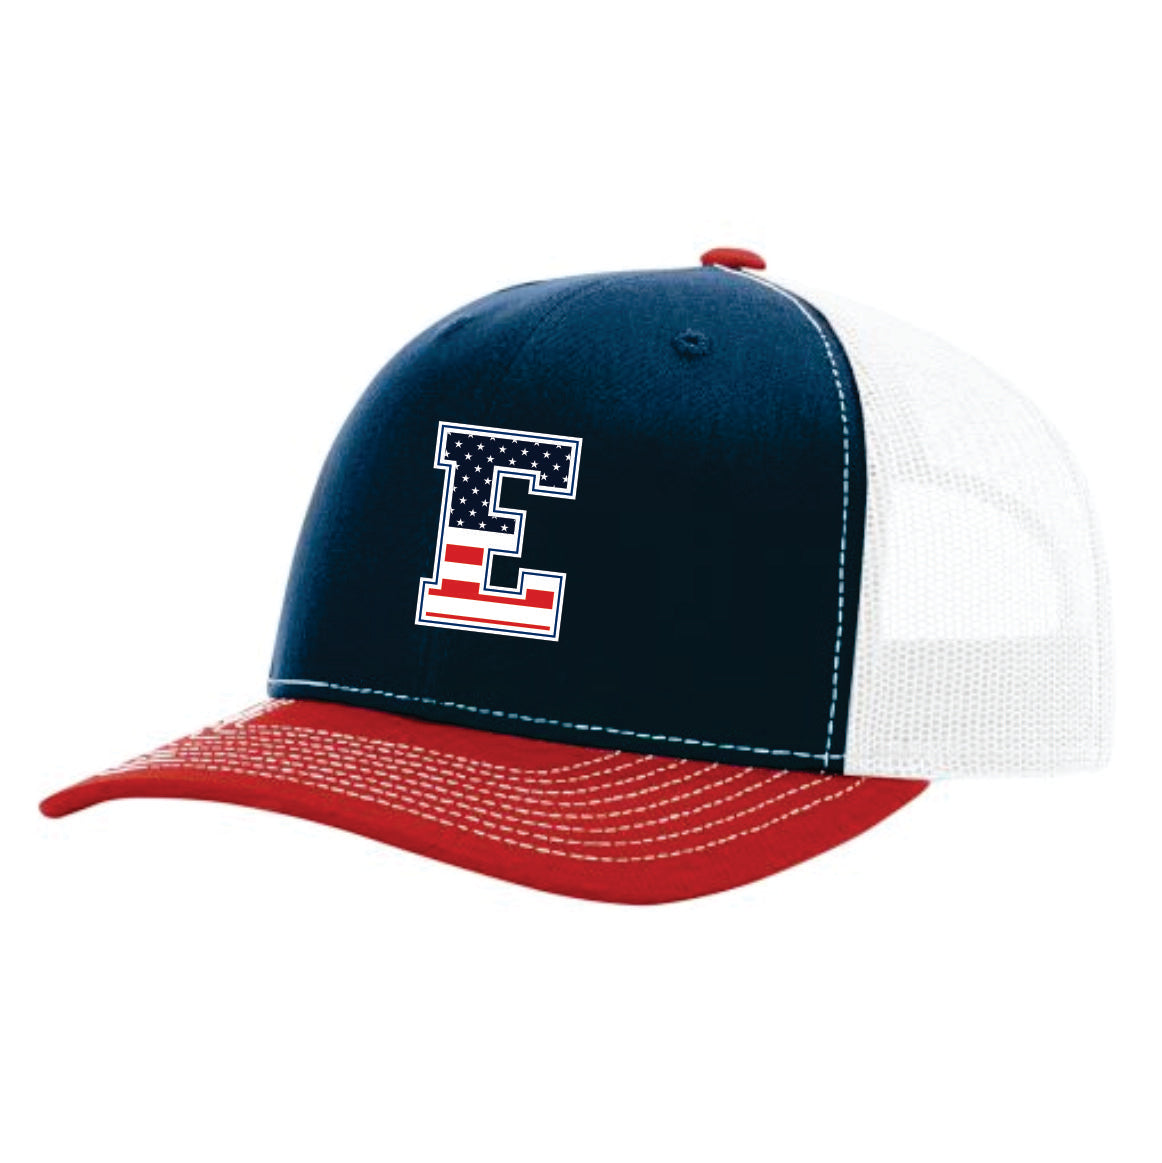 Elite Football Embroidered Trucker Style Hat